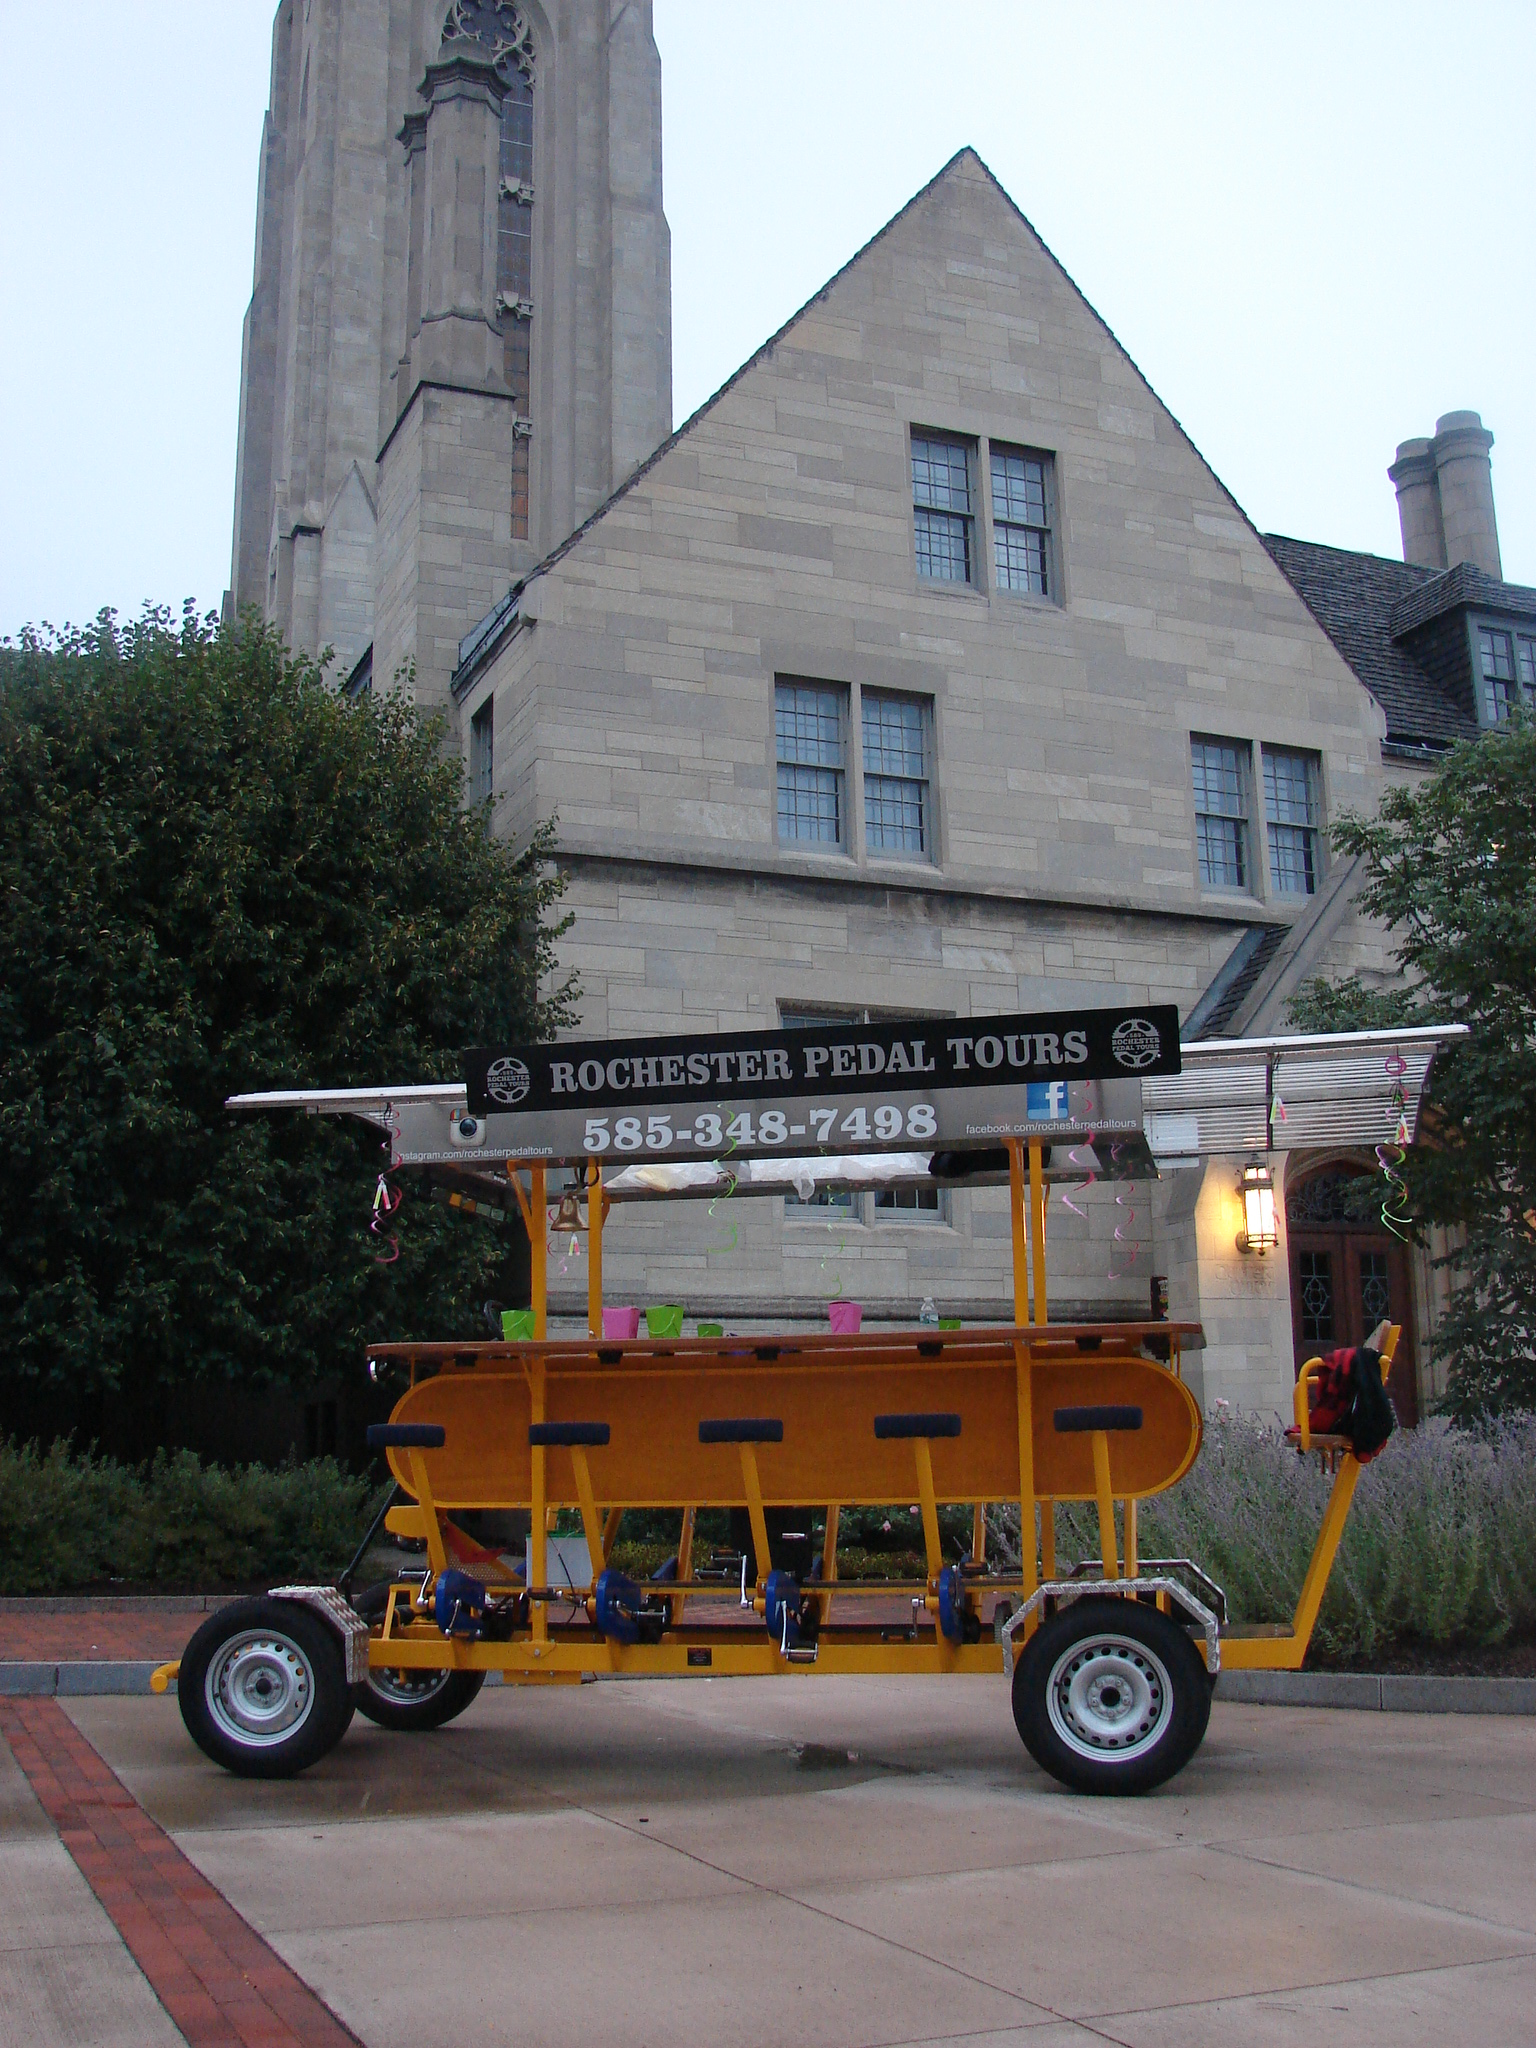 pedal pub picture in front of a cathedral